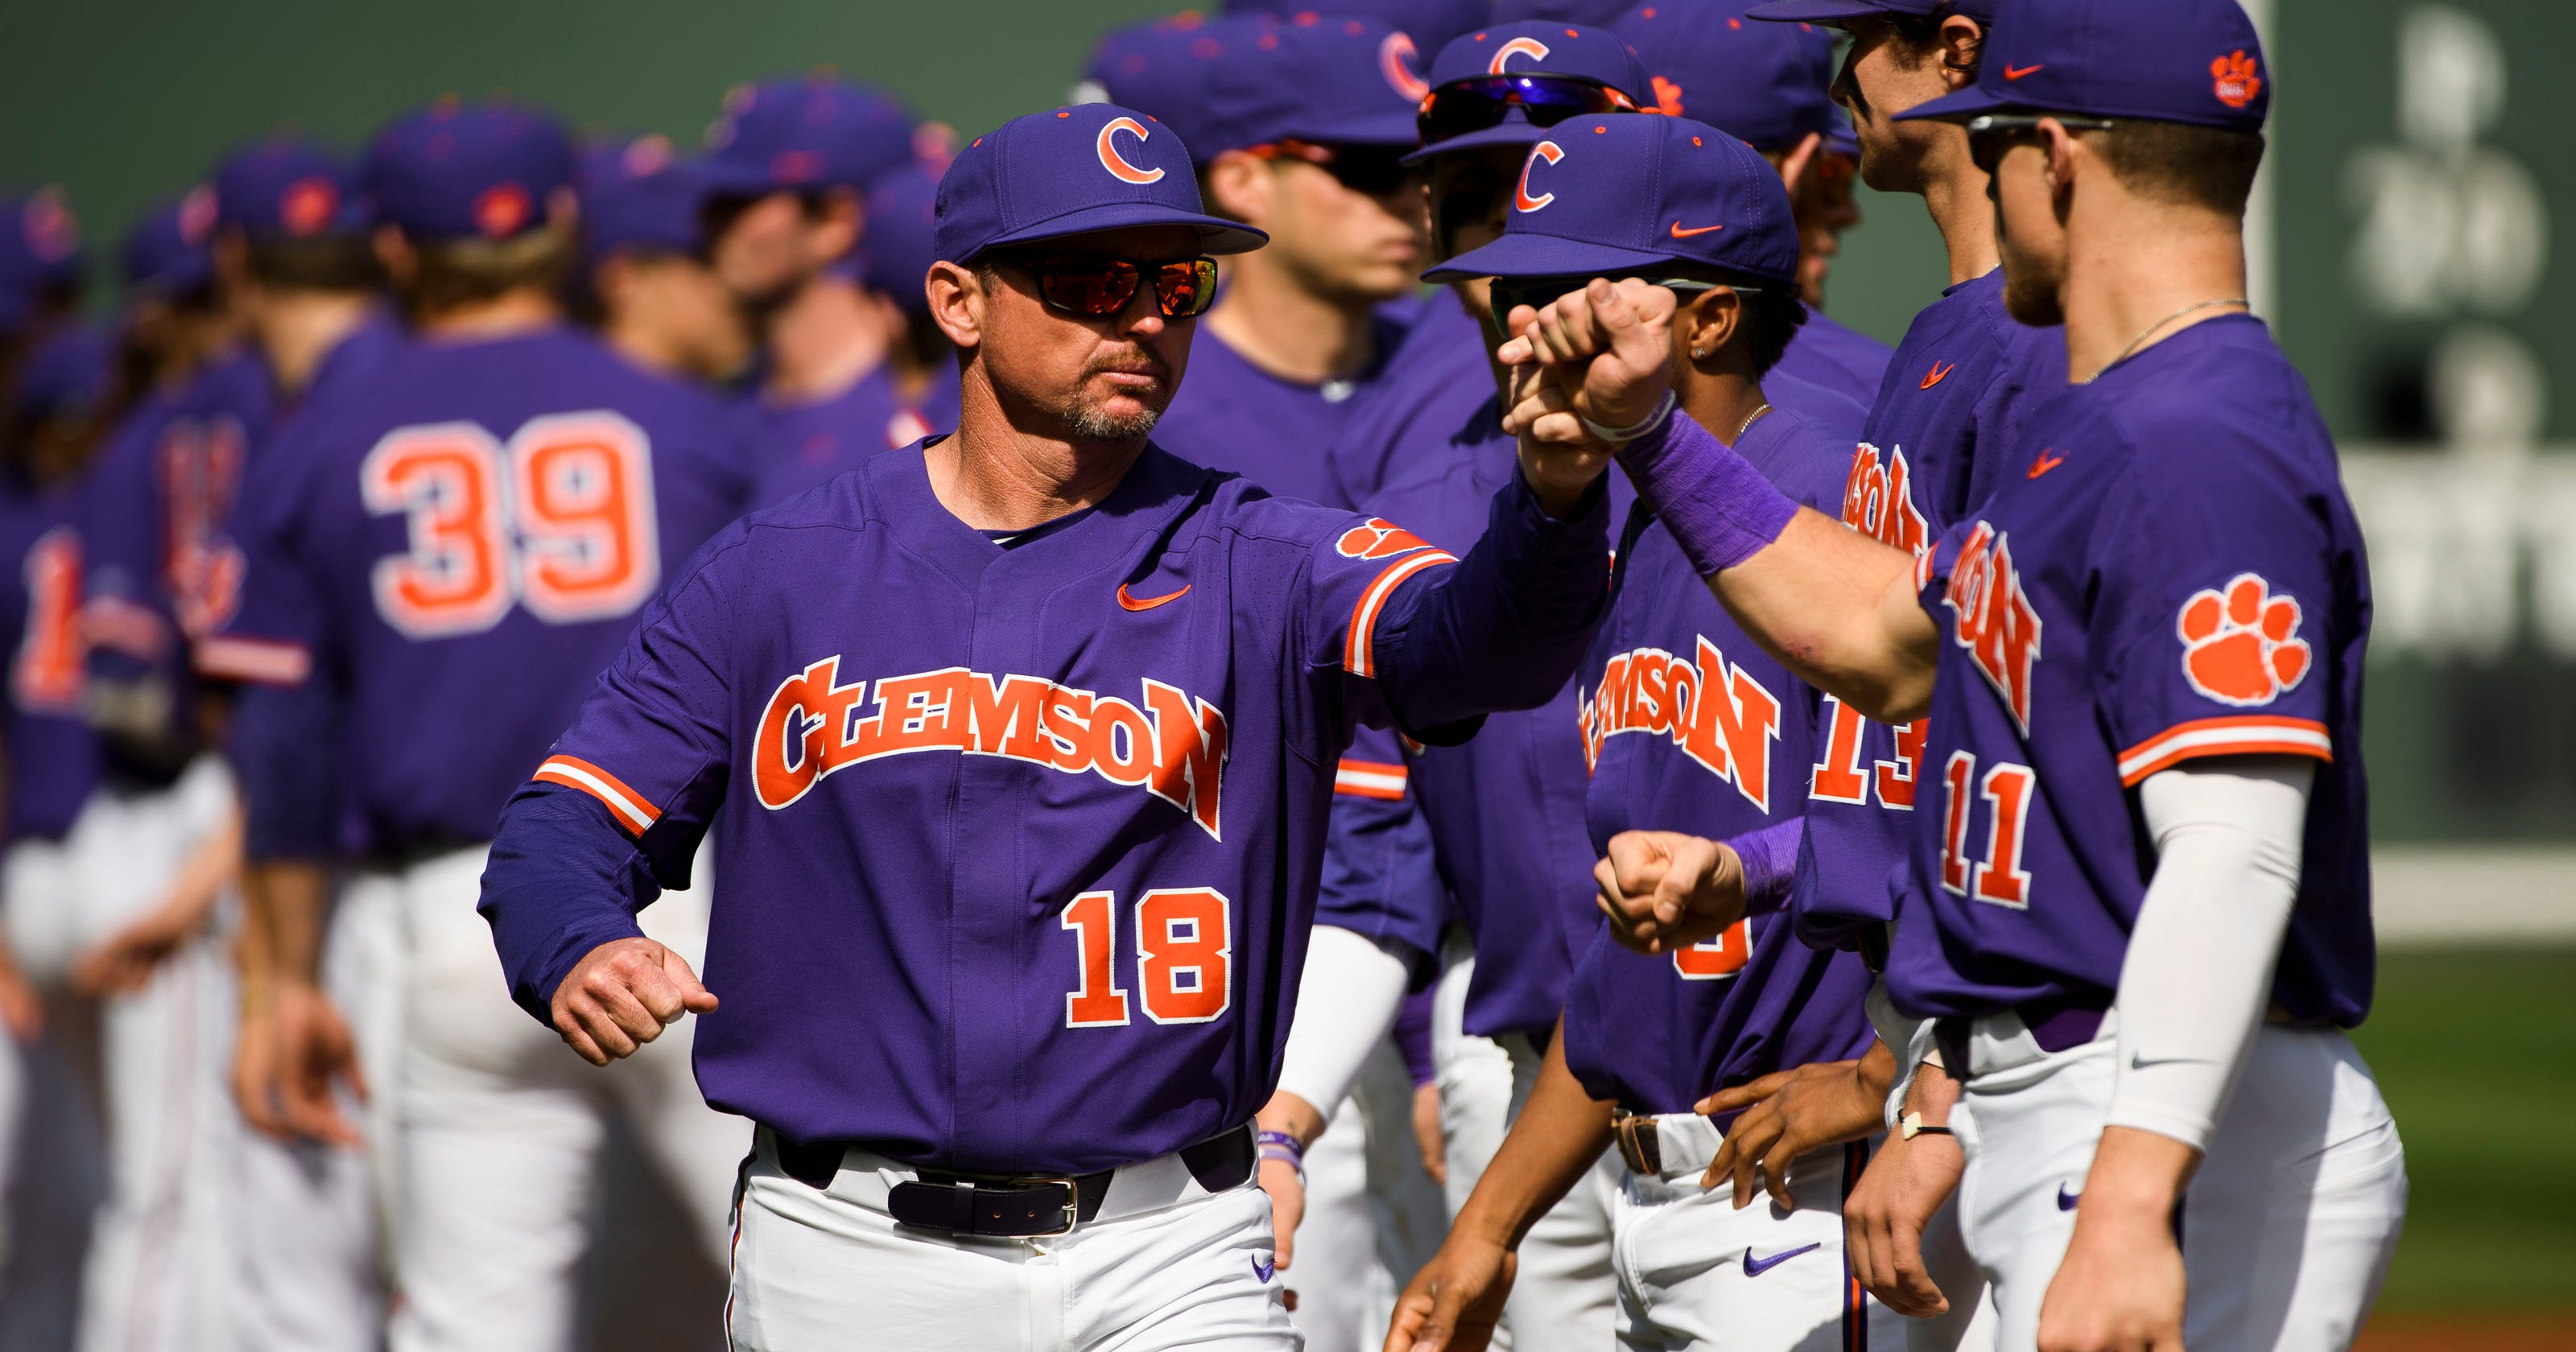 5 things as Clemson baseball faces Illinois in NCAA Tournament play